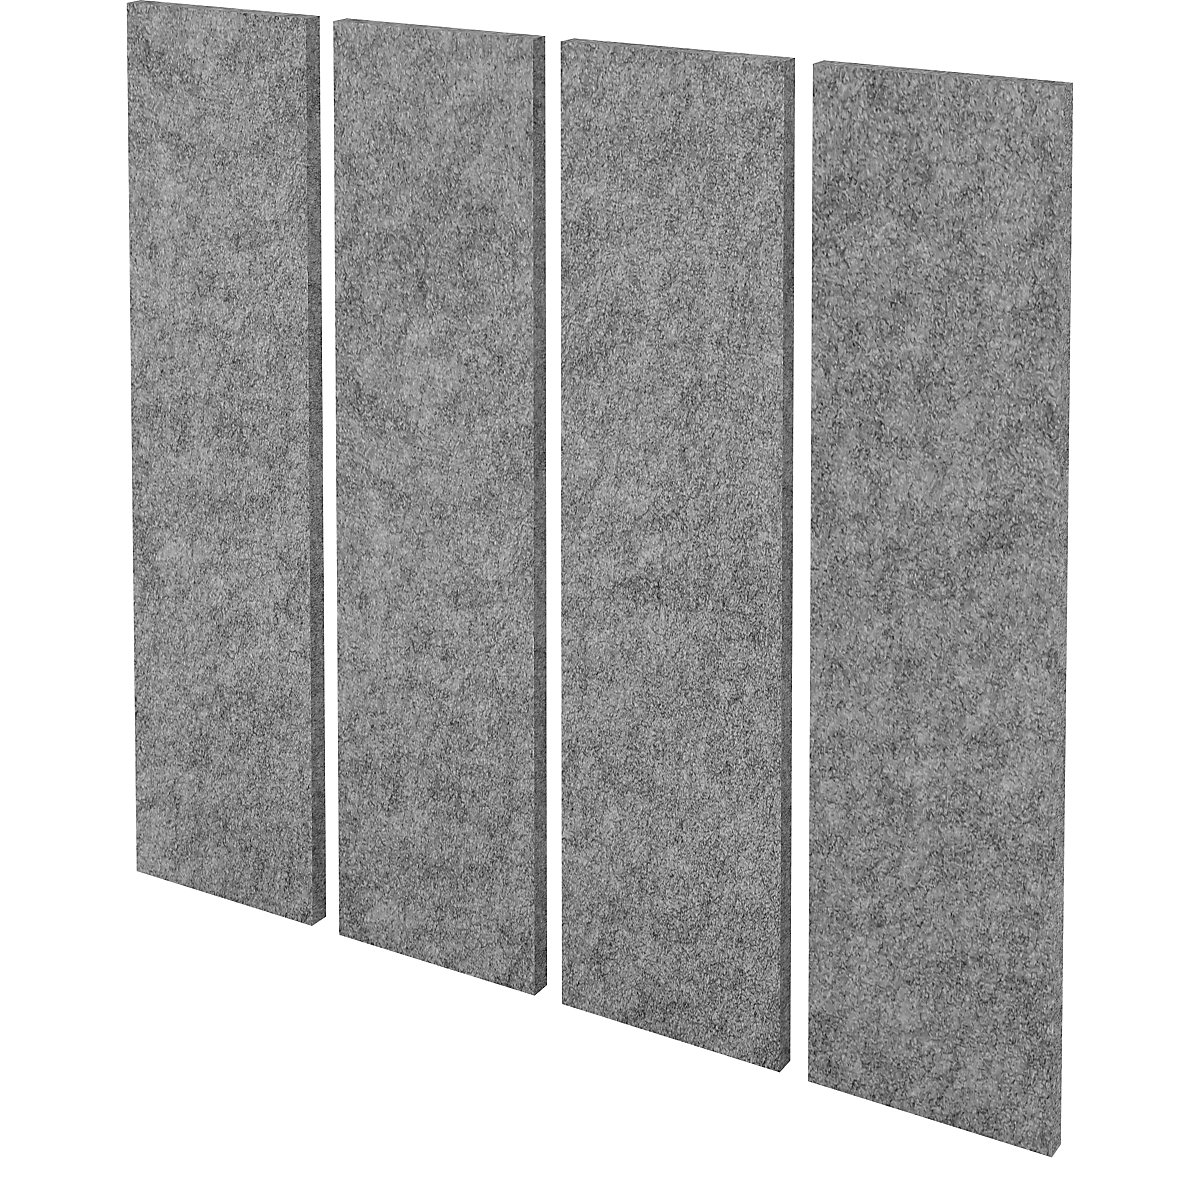 Acoustic wall panel set, wall thickness 25 mm, grey mottled, pack of 4, HxW 1000 x 250 mm-5